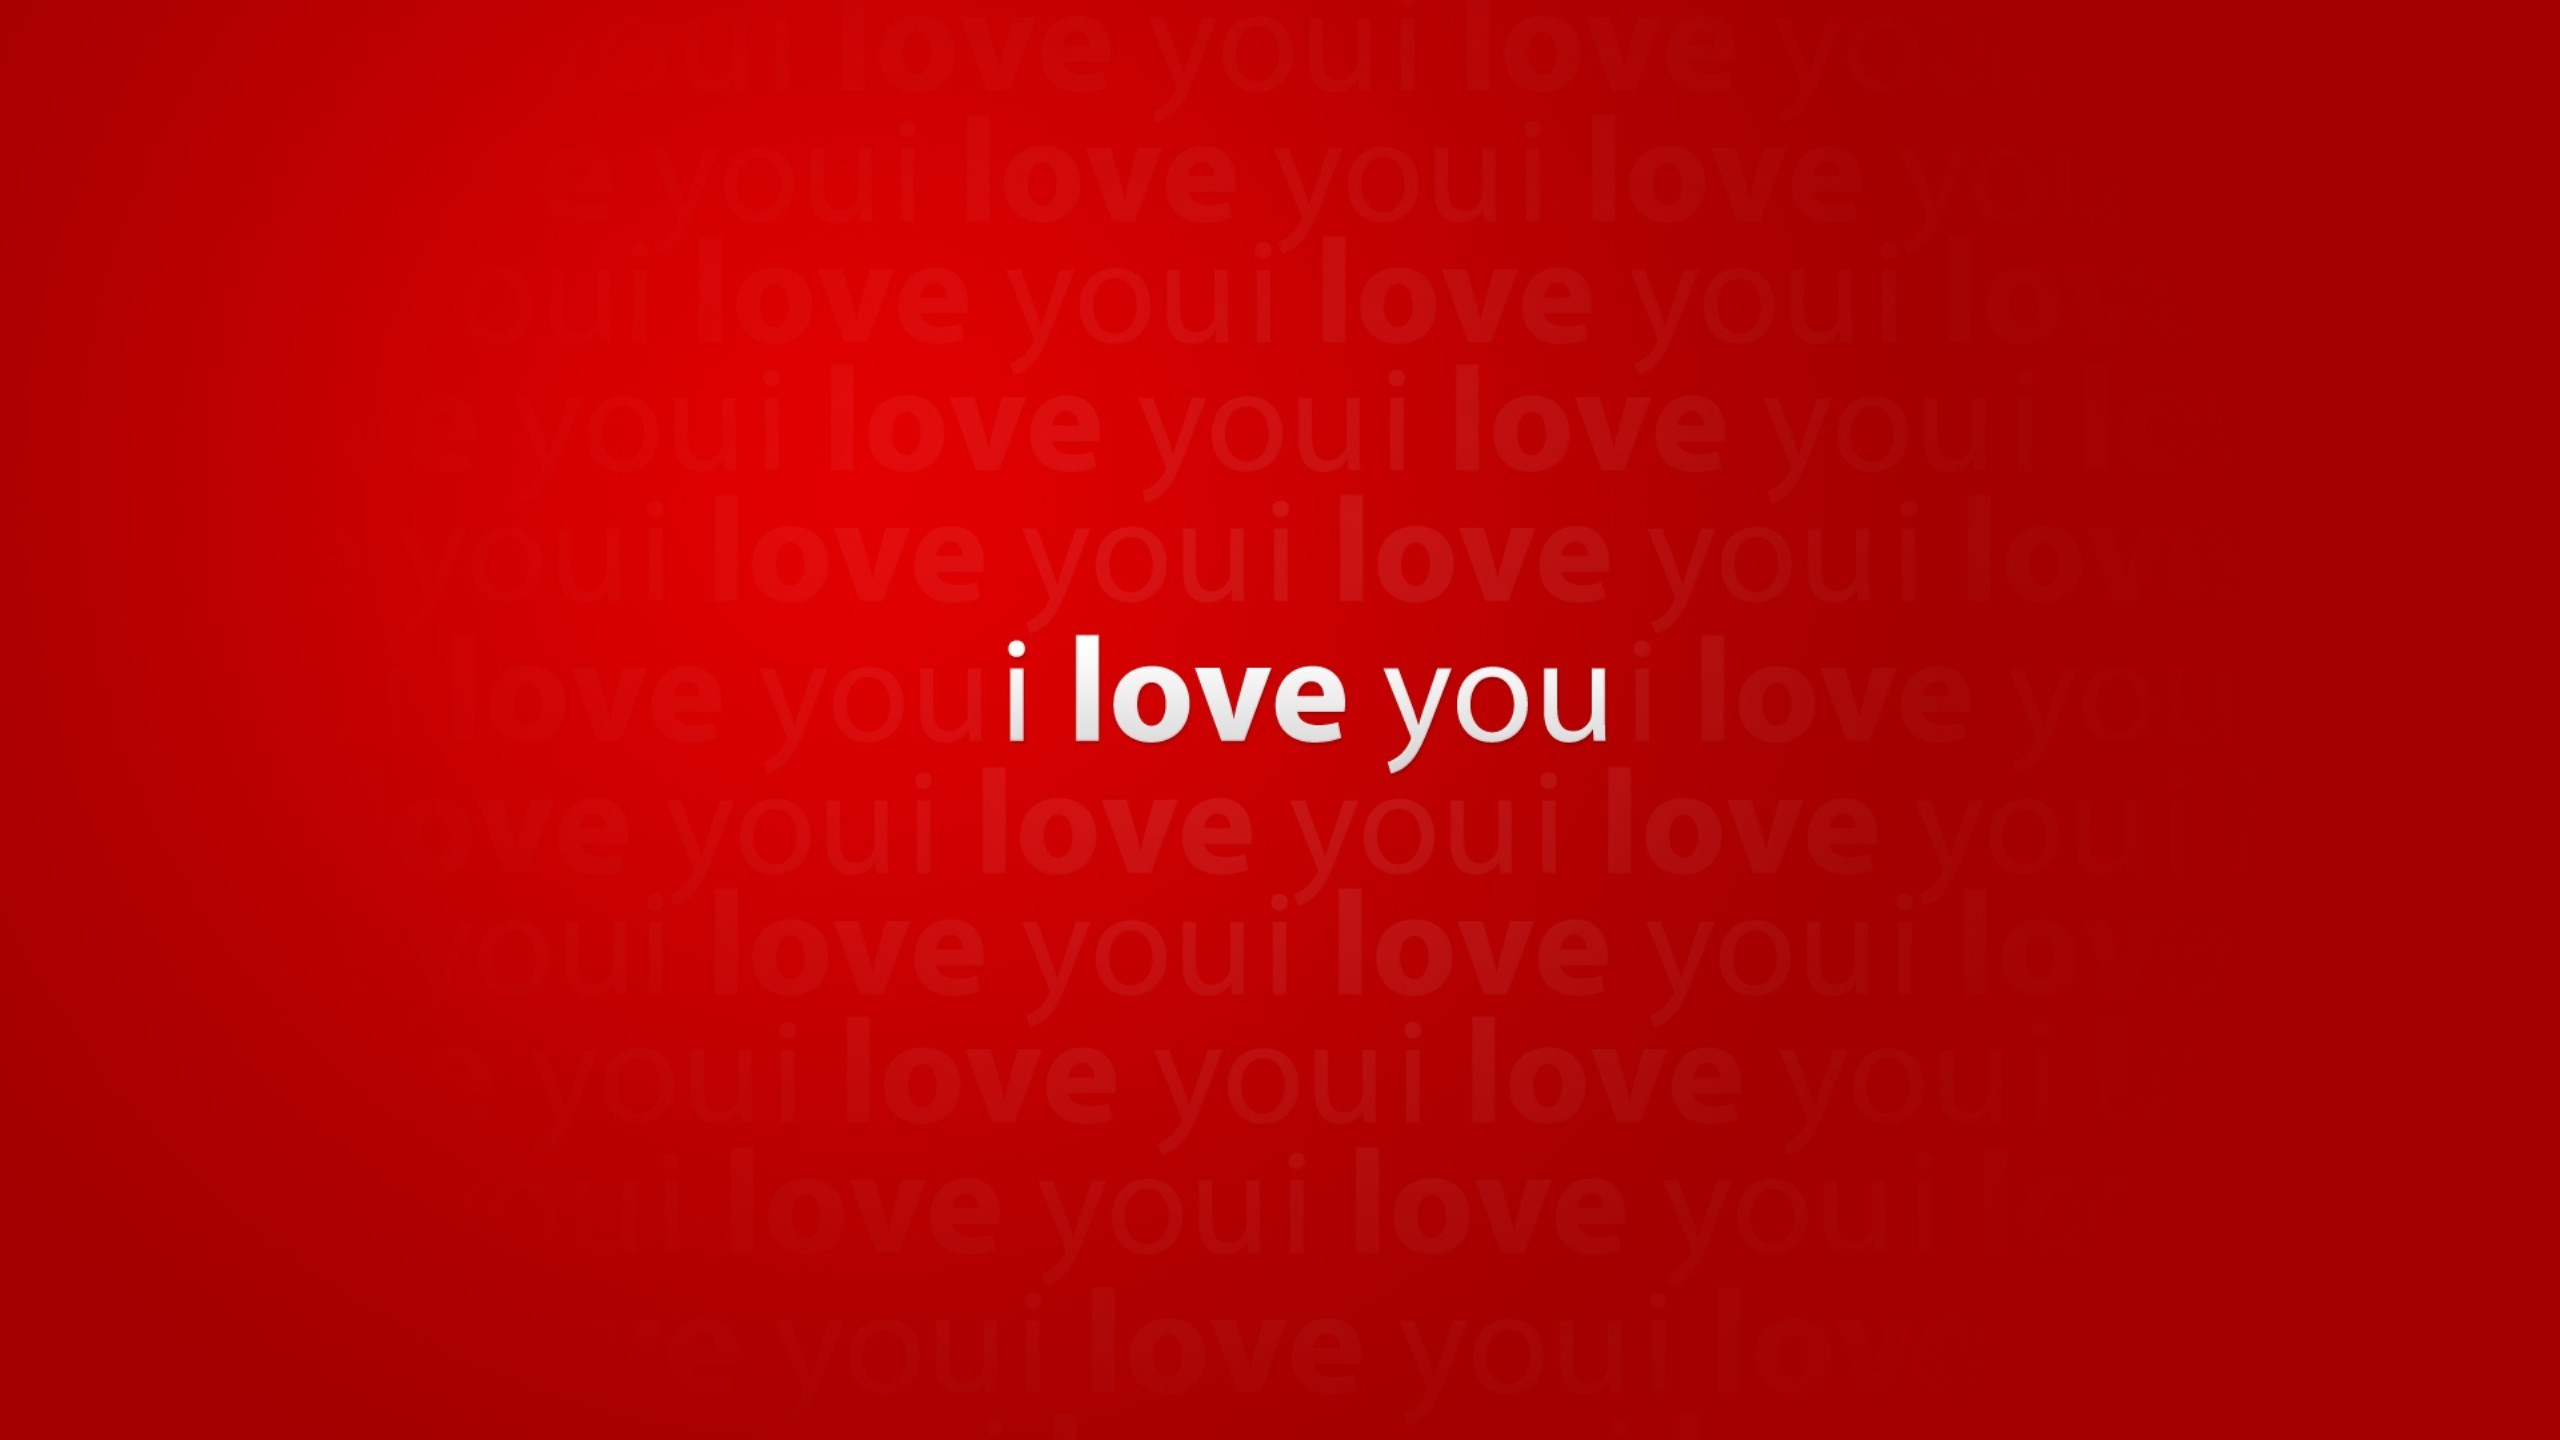 Love Poems Wallpapers (39+ images)2560 x 1440